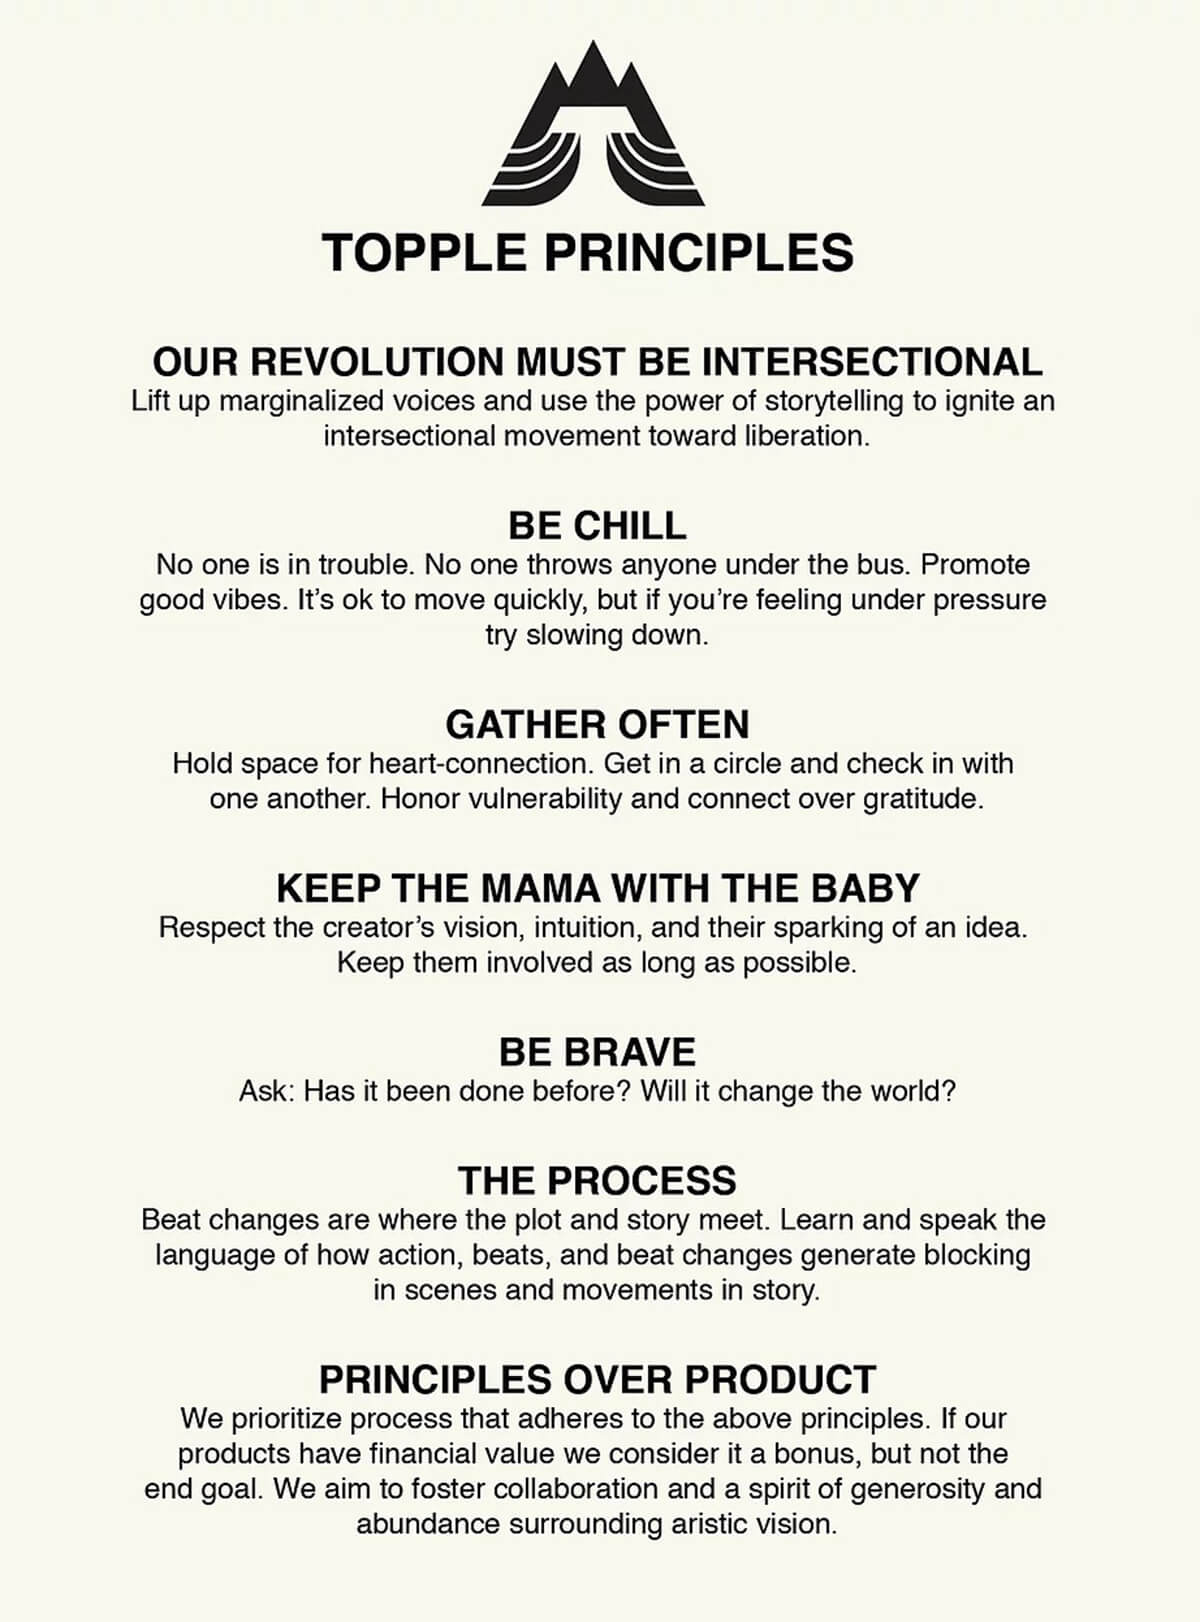 The Principles of Soloway's Topple Productions